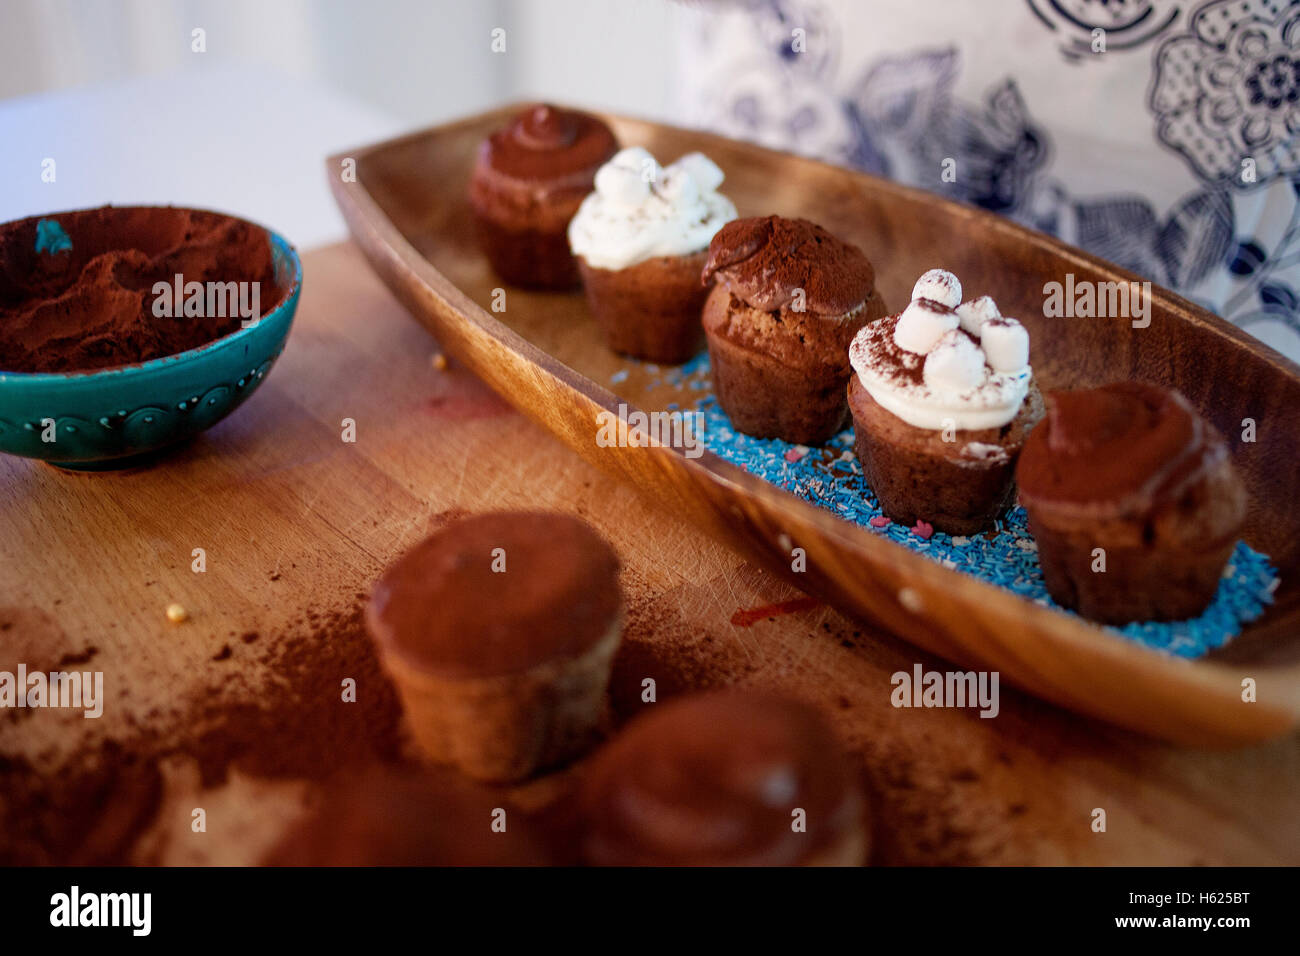 cooking cupcakes, muffins and a plate of ingredients for decoration on the table Stock Photo